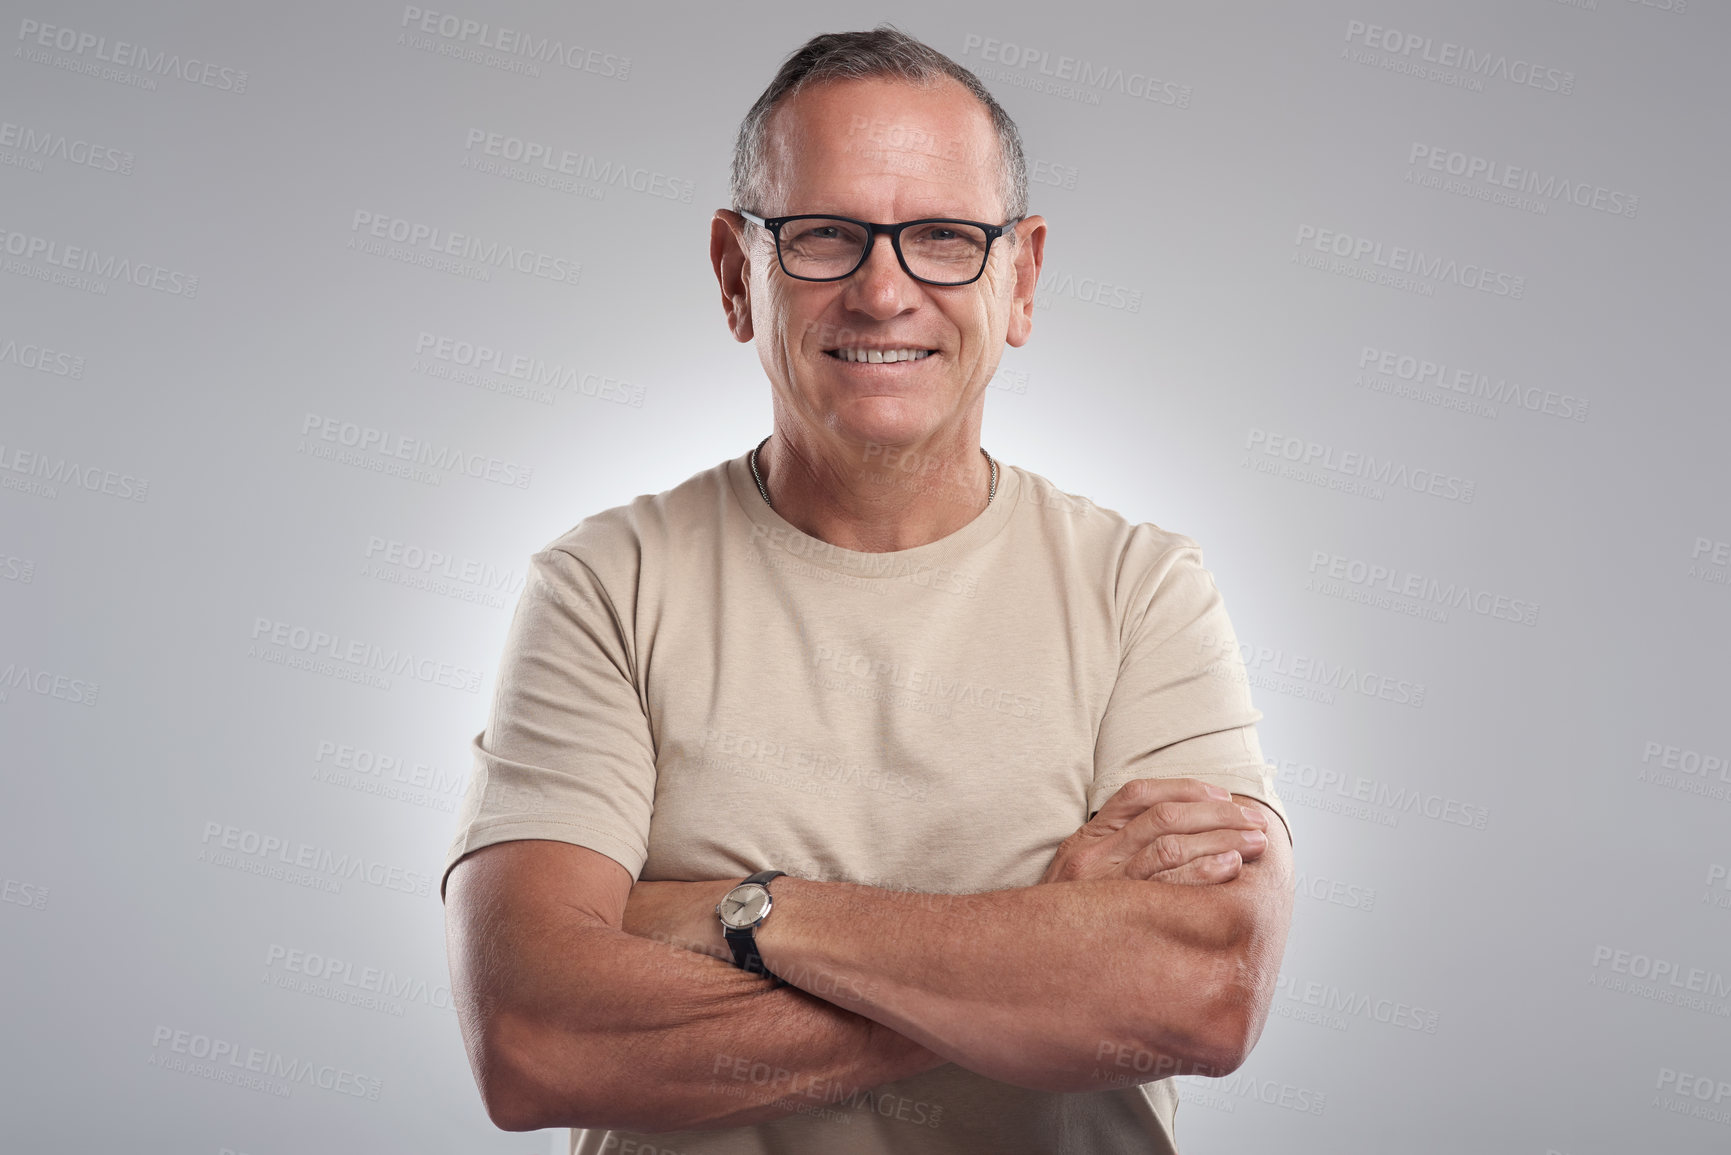 Buy stock photo Shot of a handsome mature man standing alone against a grey background in the studio with his arms folded